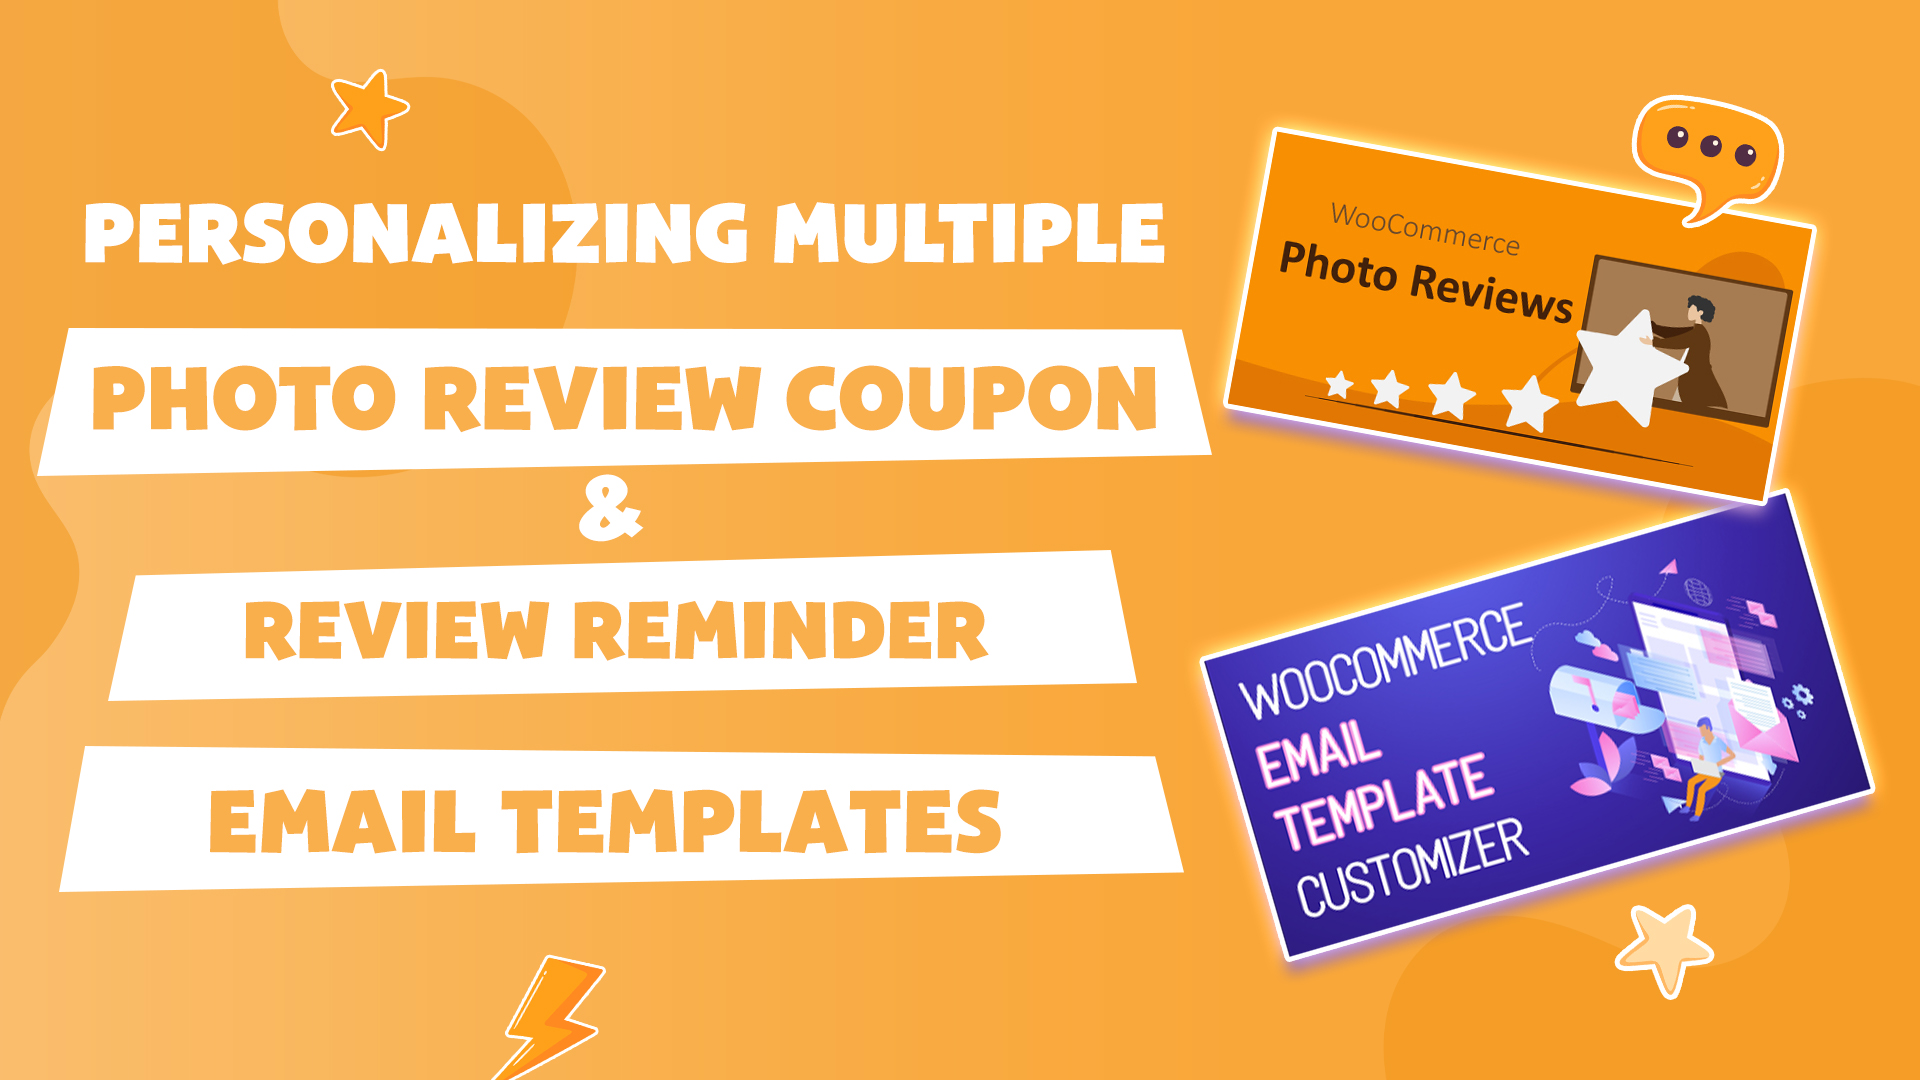 Multiple email templates for review reminders and review coupons